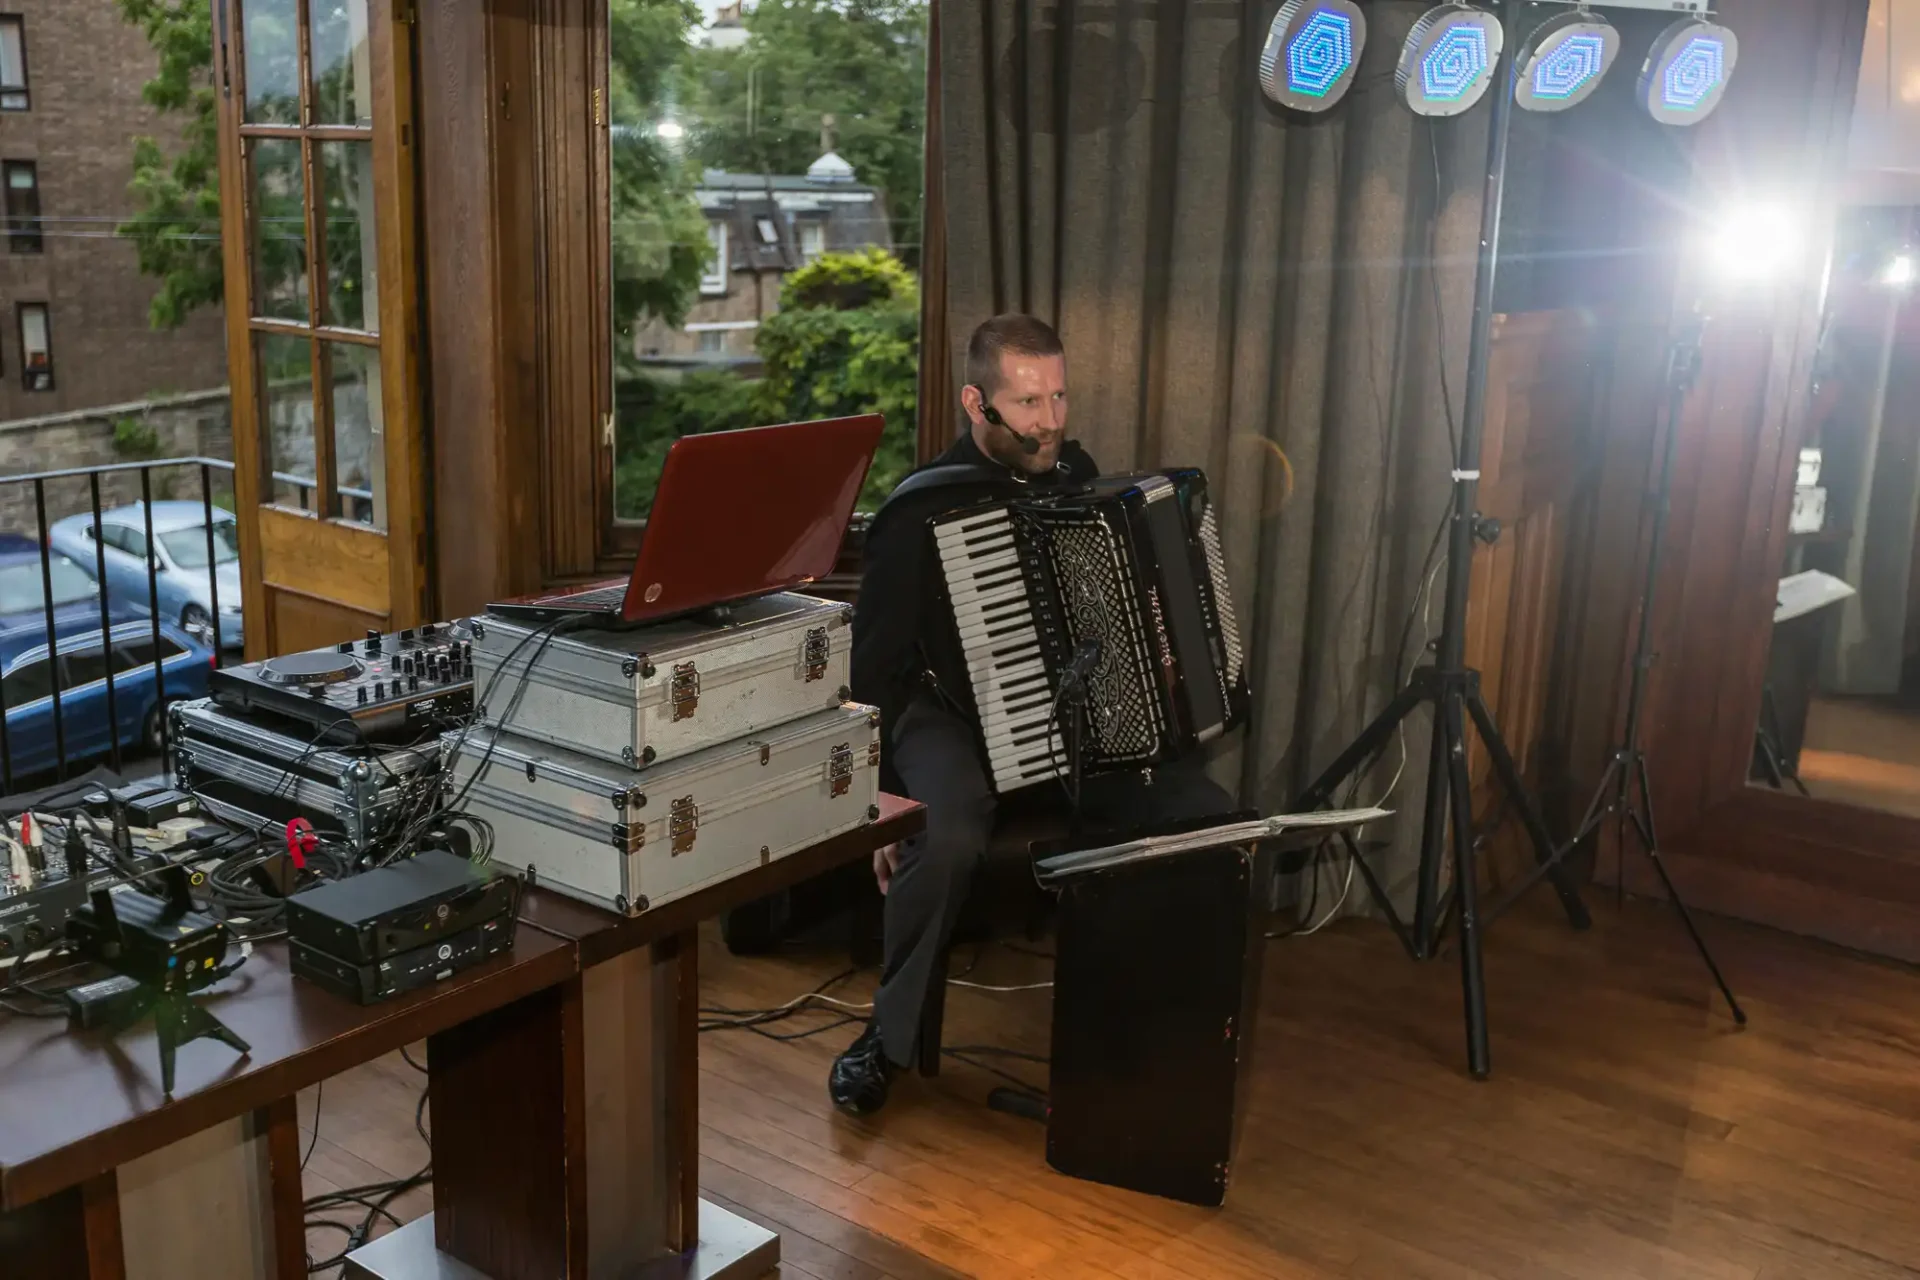 A man playing an accordion next to a table with sound equipment in a room with large windows overlooking trees.